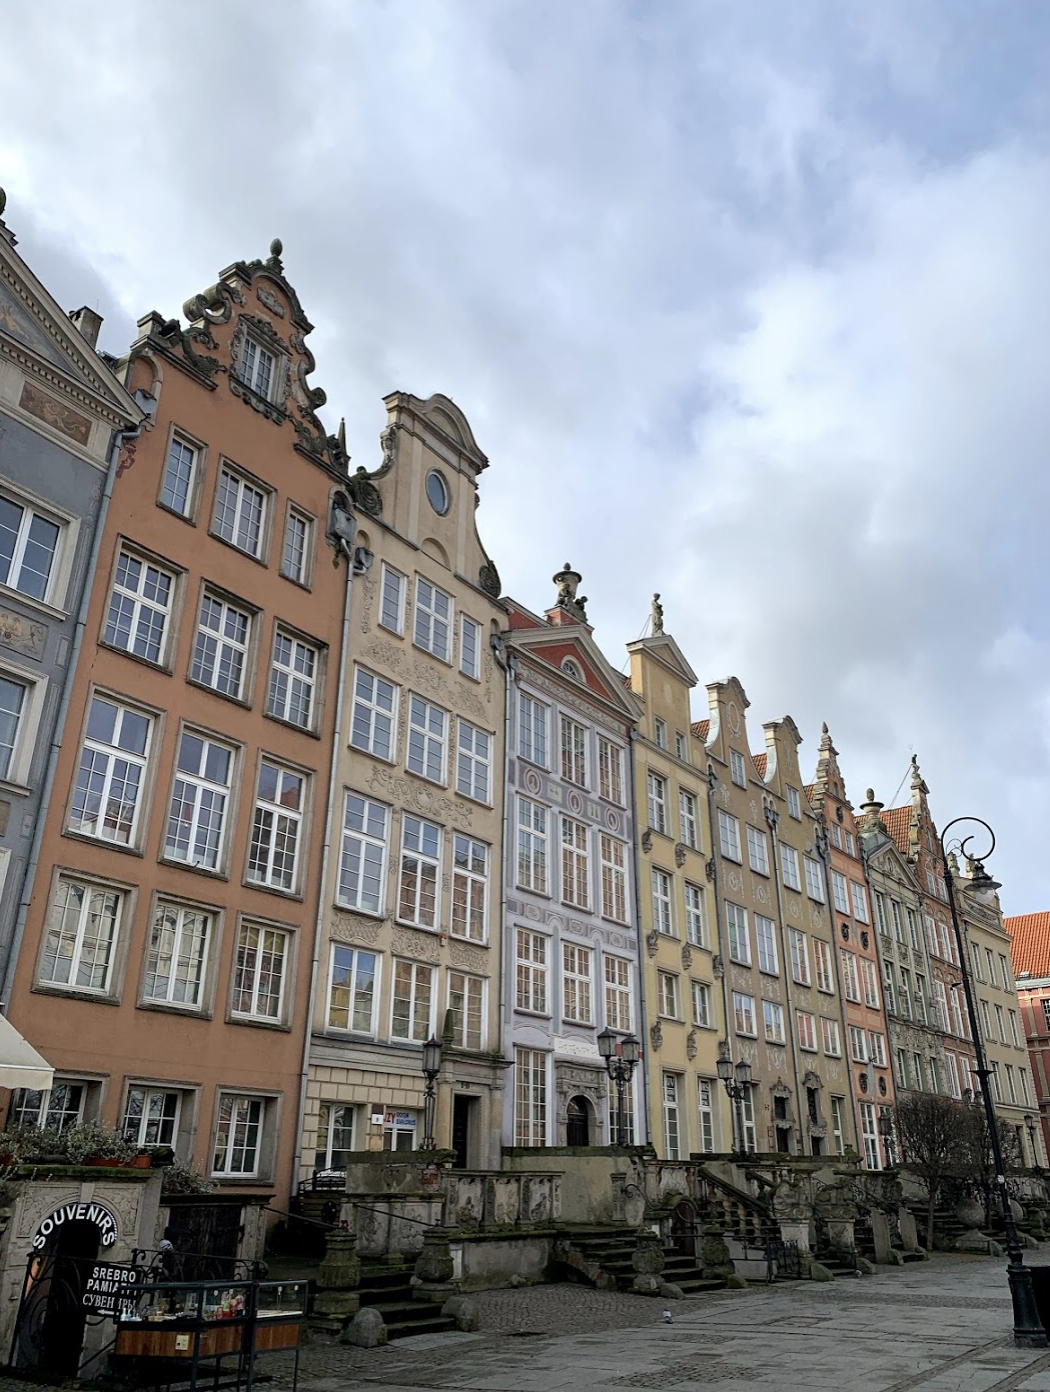 Colourful buildings in Gdańsk, Poland